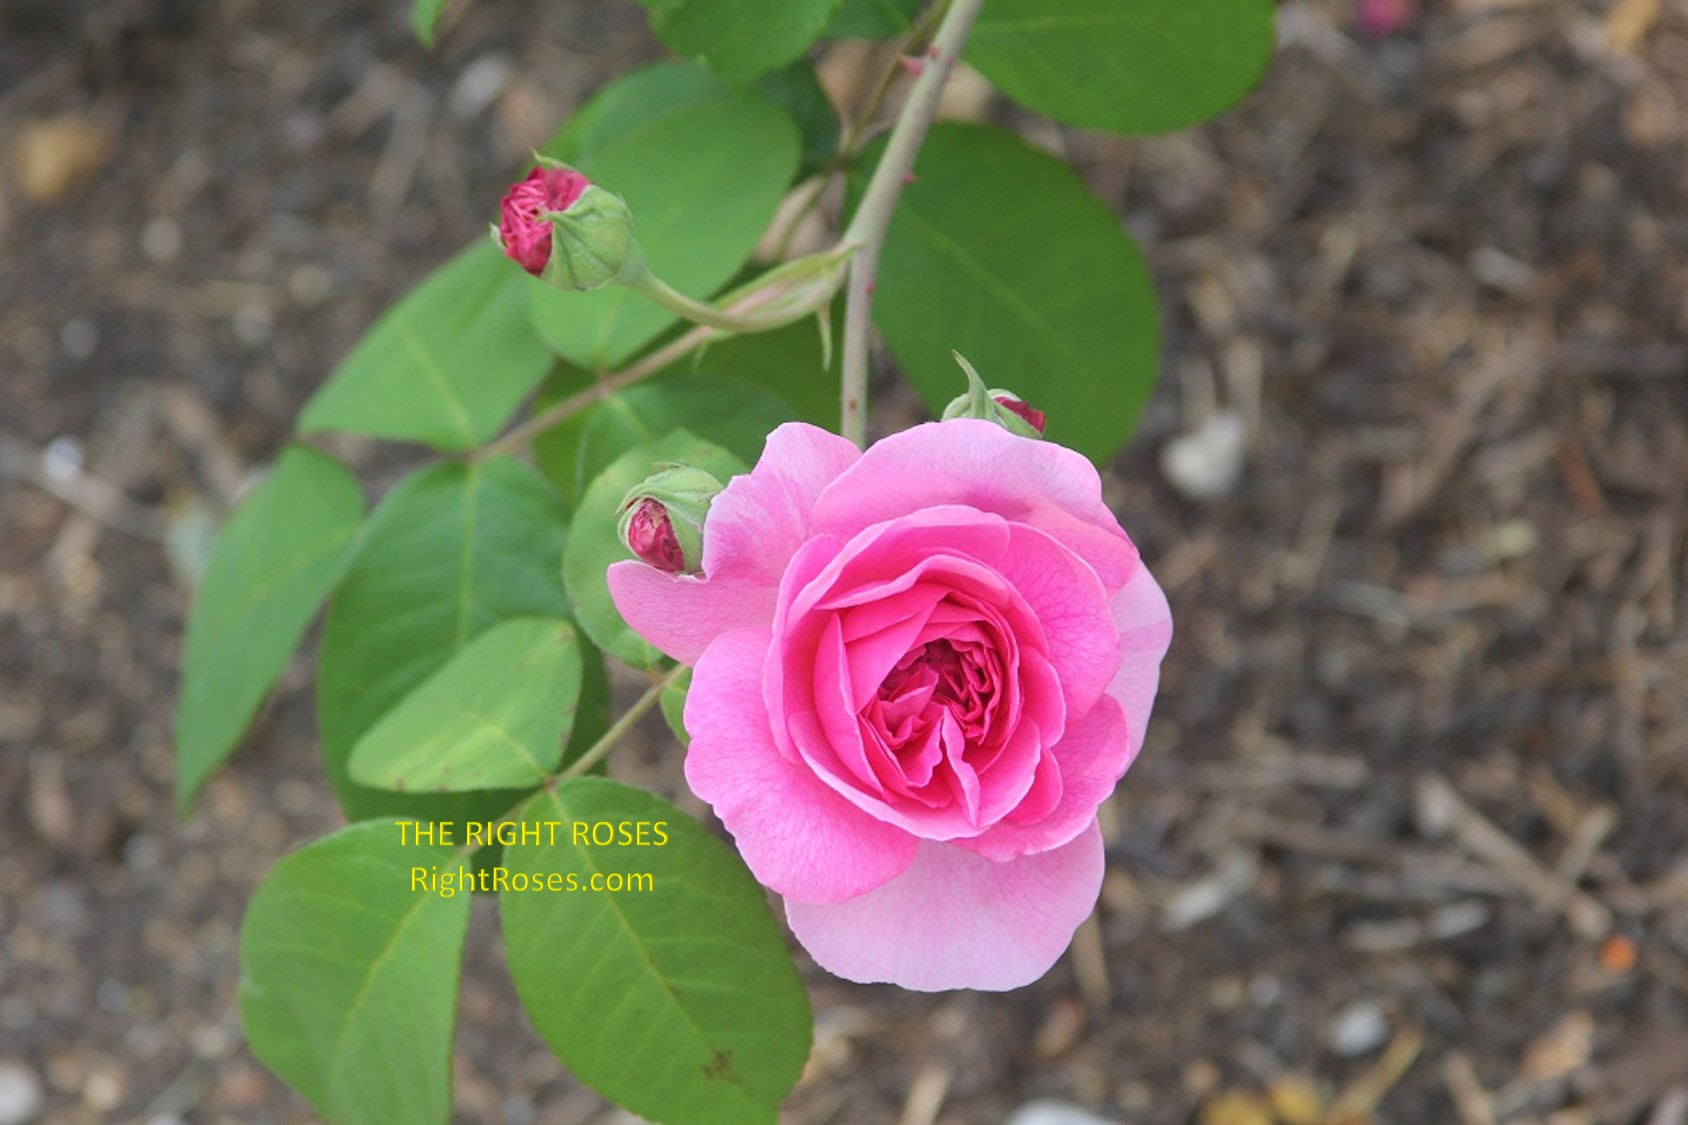 Gertrude Jekyll rose review the right roses score best top garden store david austin english roses rose products rose rating the right leap rose food fertilizer